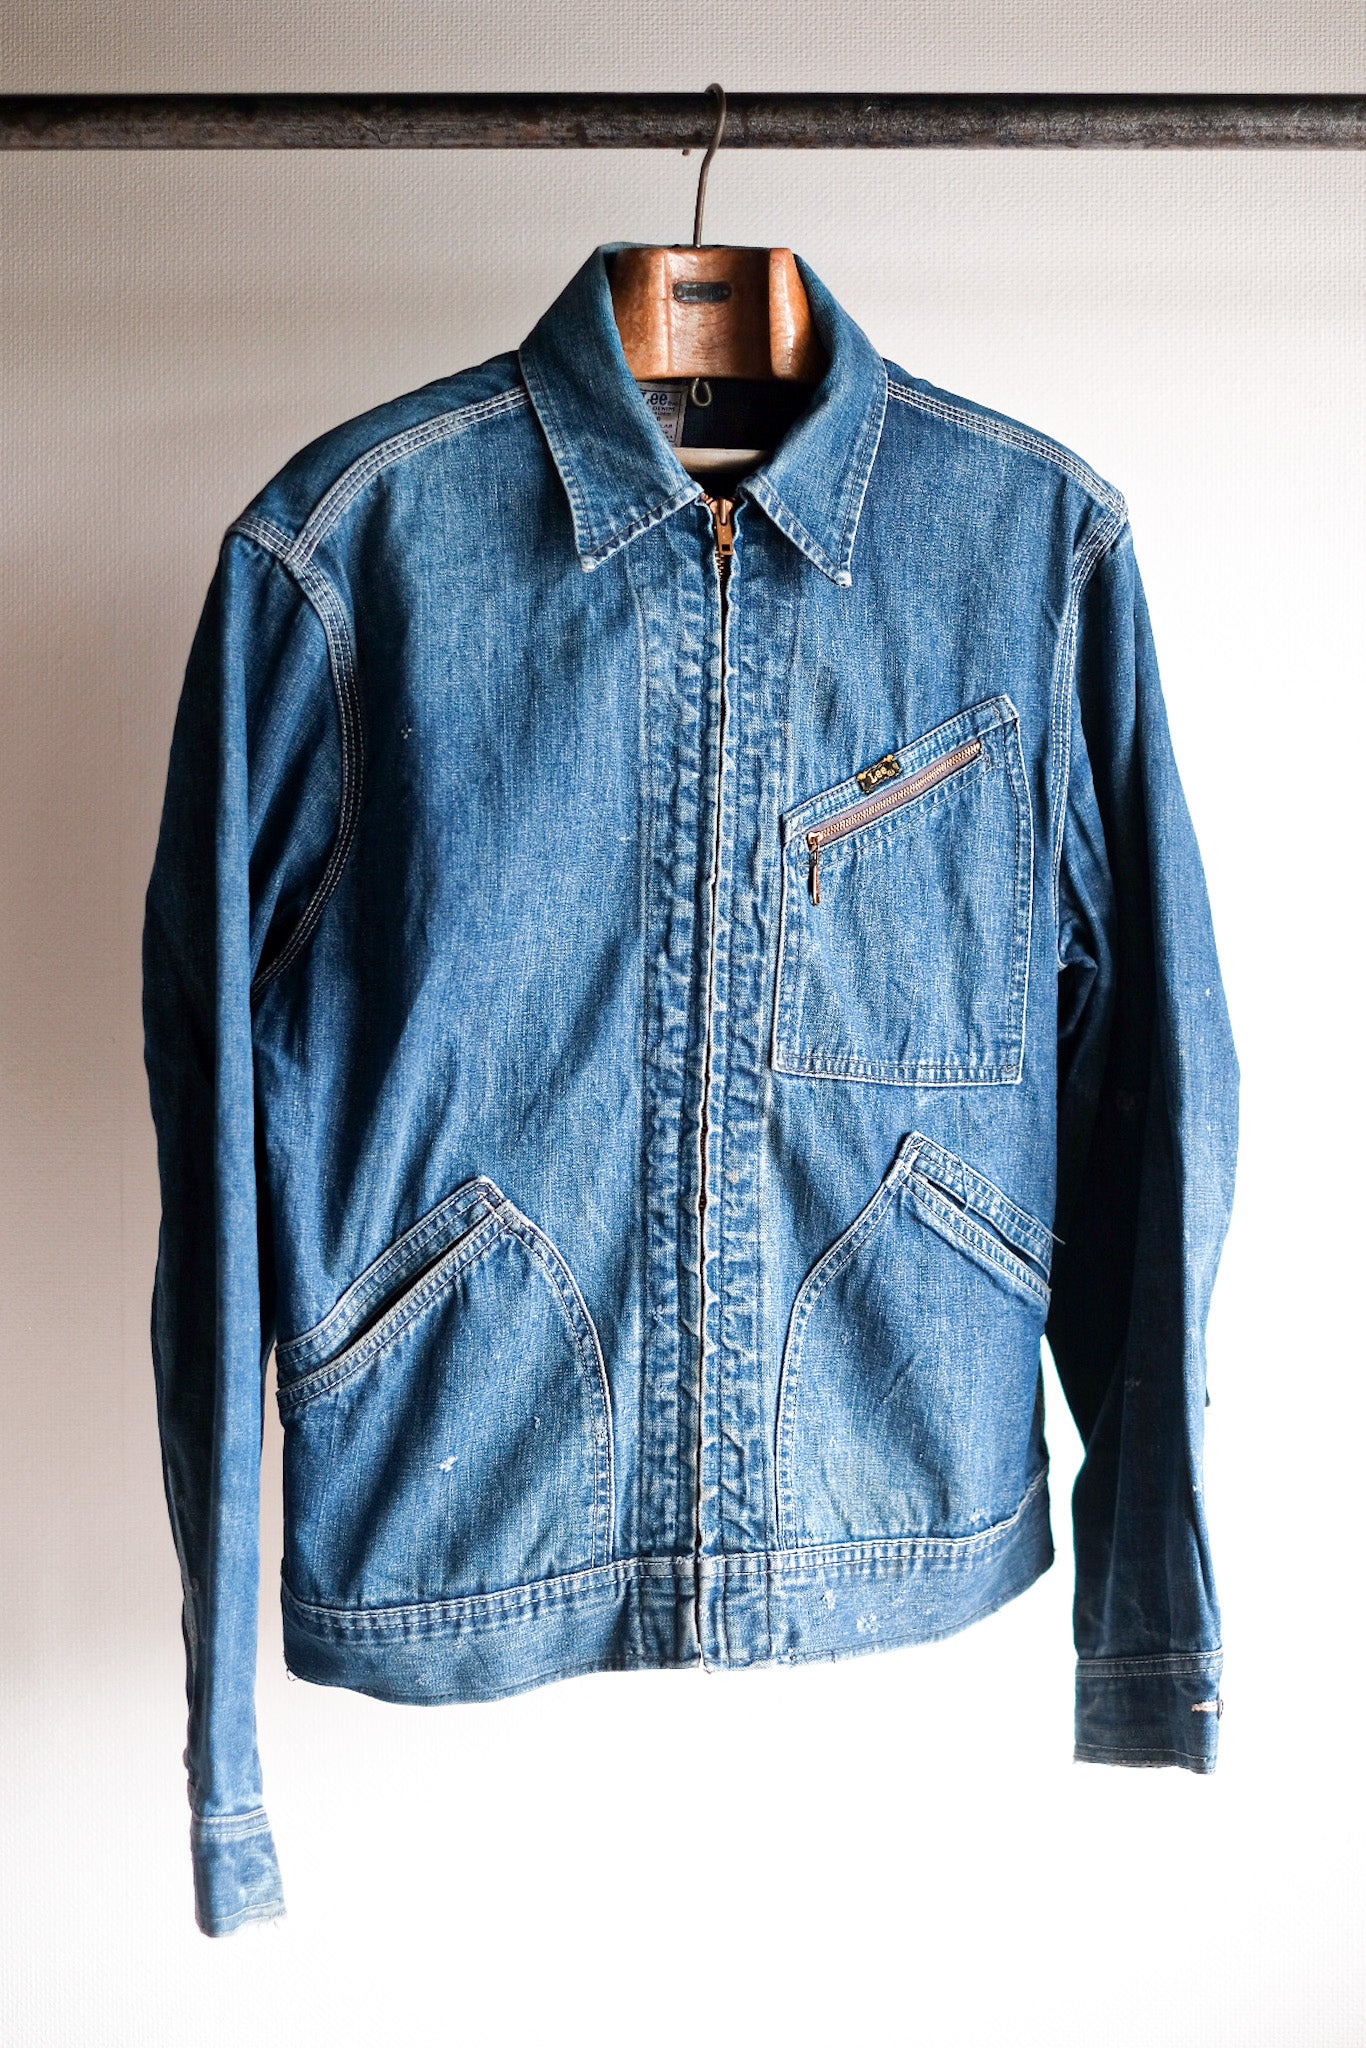 1980s Lee Storm Rider Insulated Denim Jean Jacket with Corduroy Collar –  Red Vintage Co